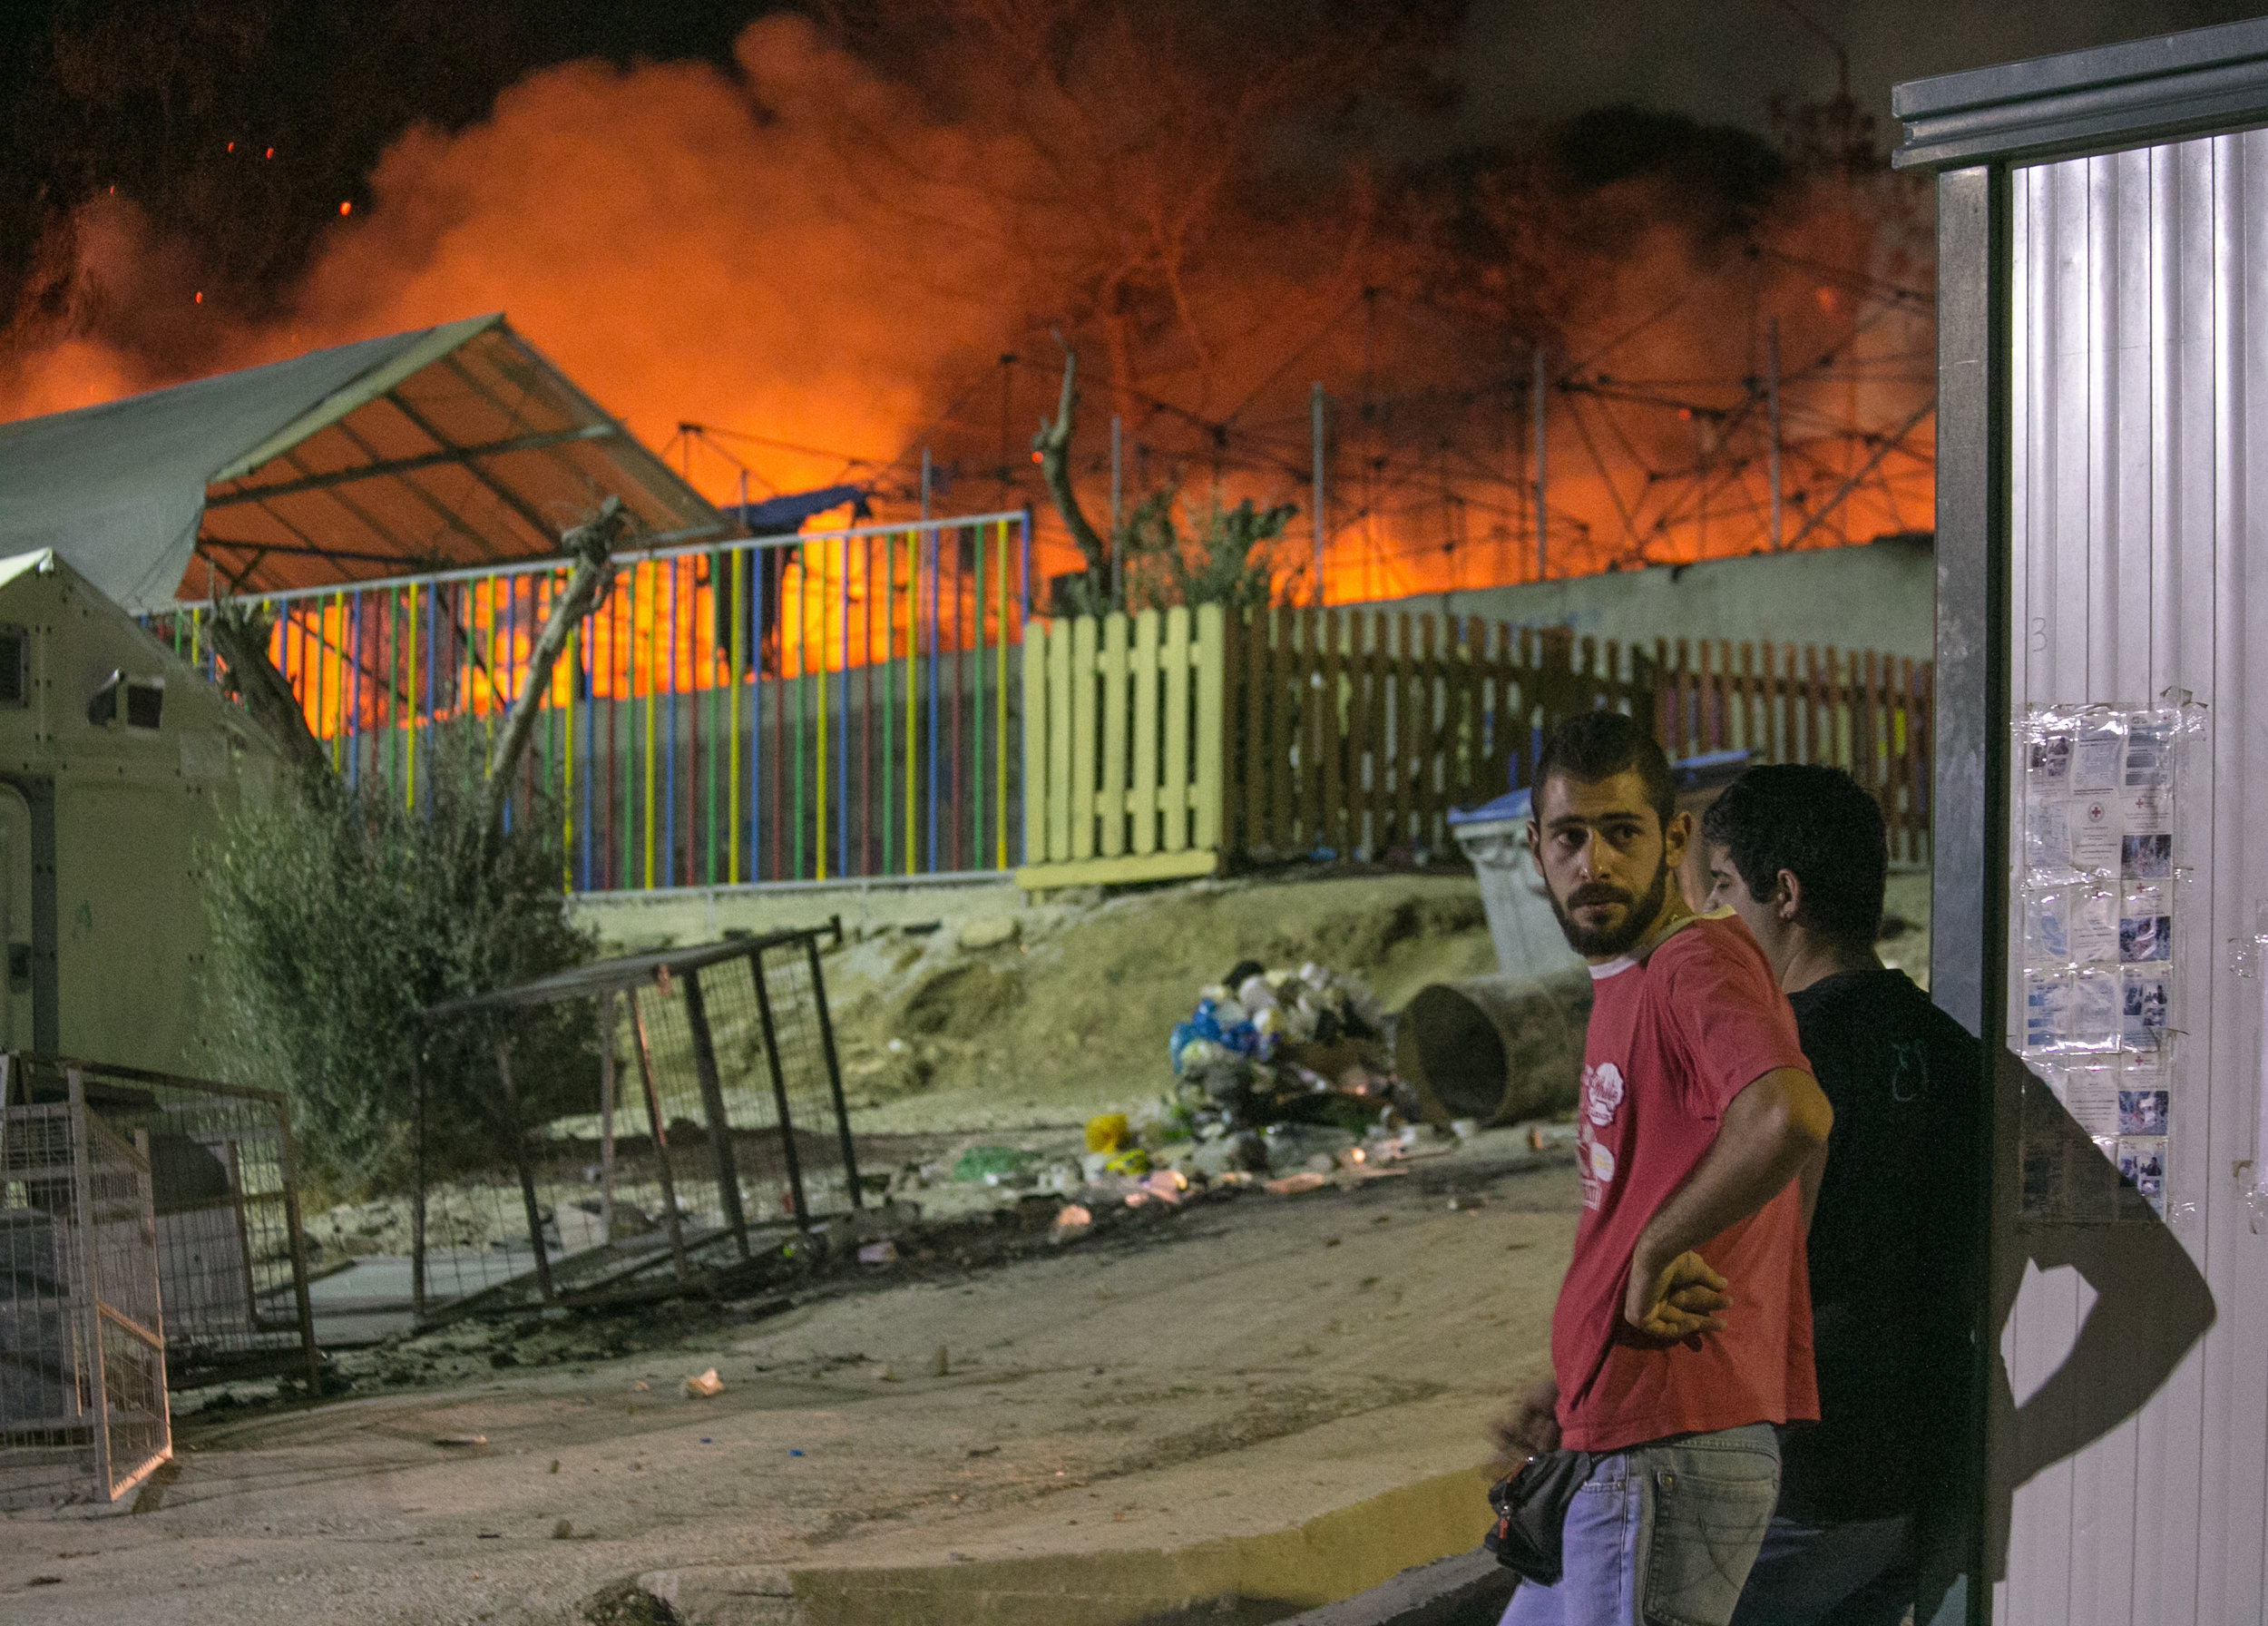  Migrants look on as one of the largest camps in Lesvos burns to the ground. The violence began early this morning with small incidents of rock throwing and trash burning, but quickly worsened as the day went on. According to several South African re